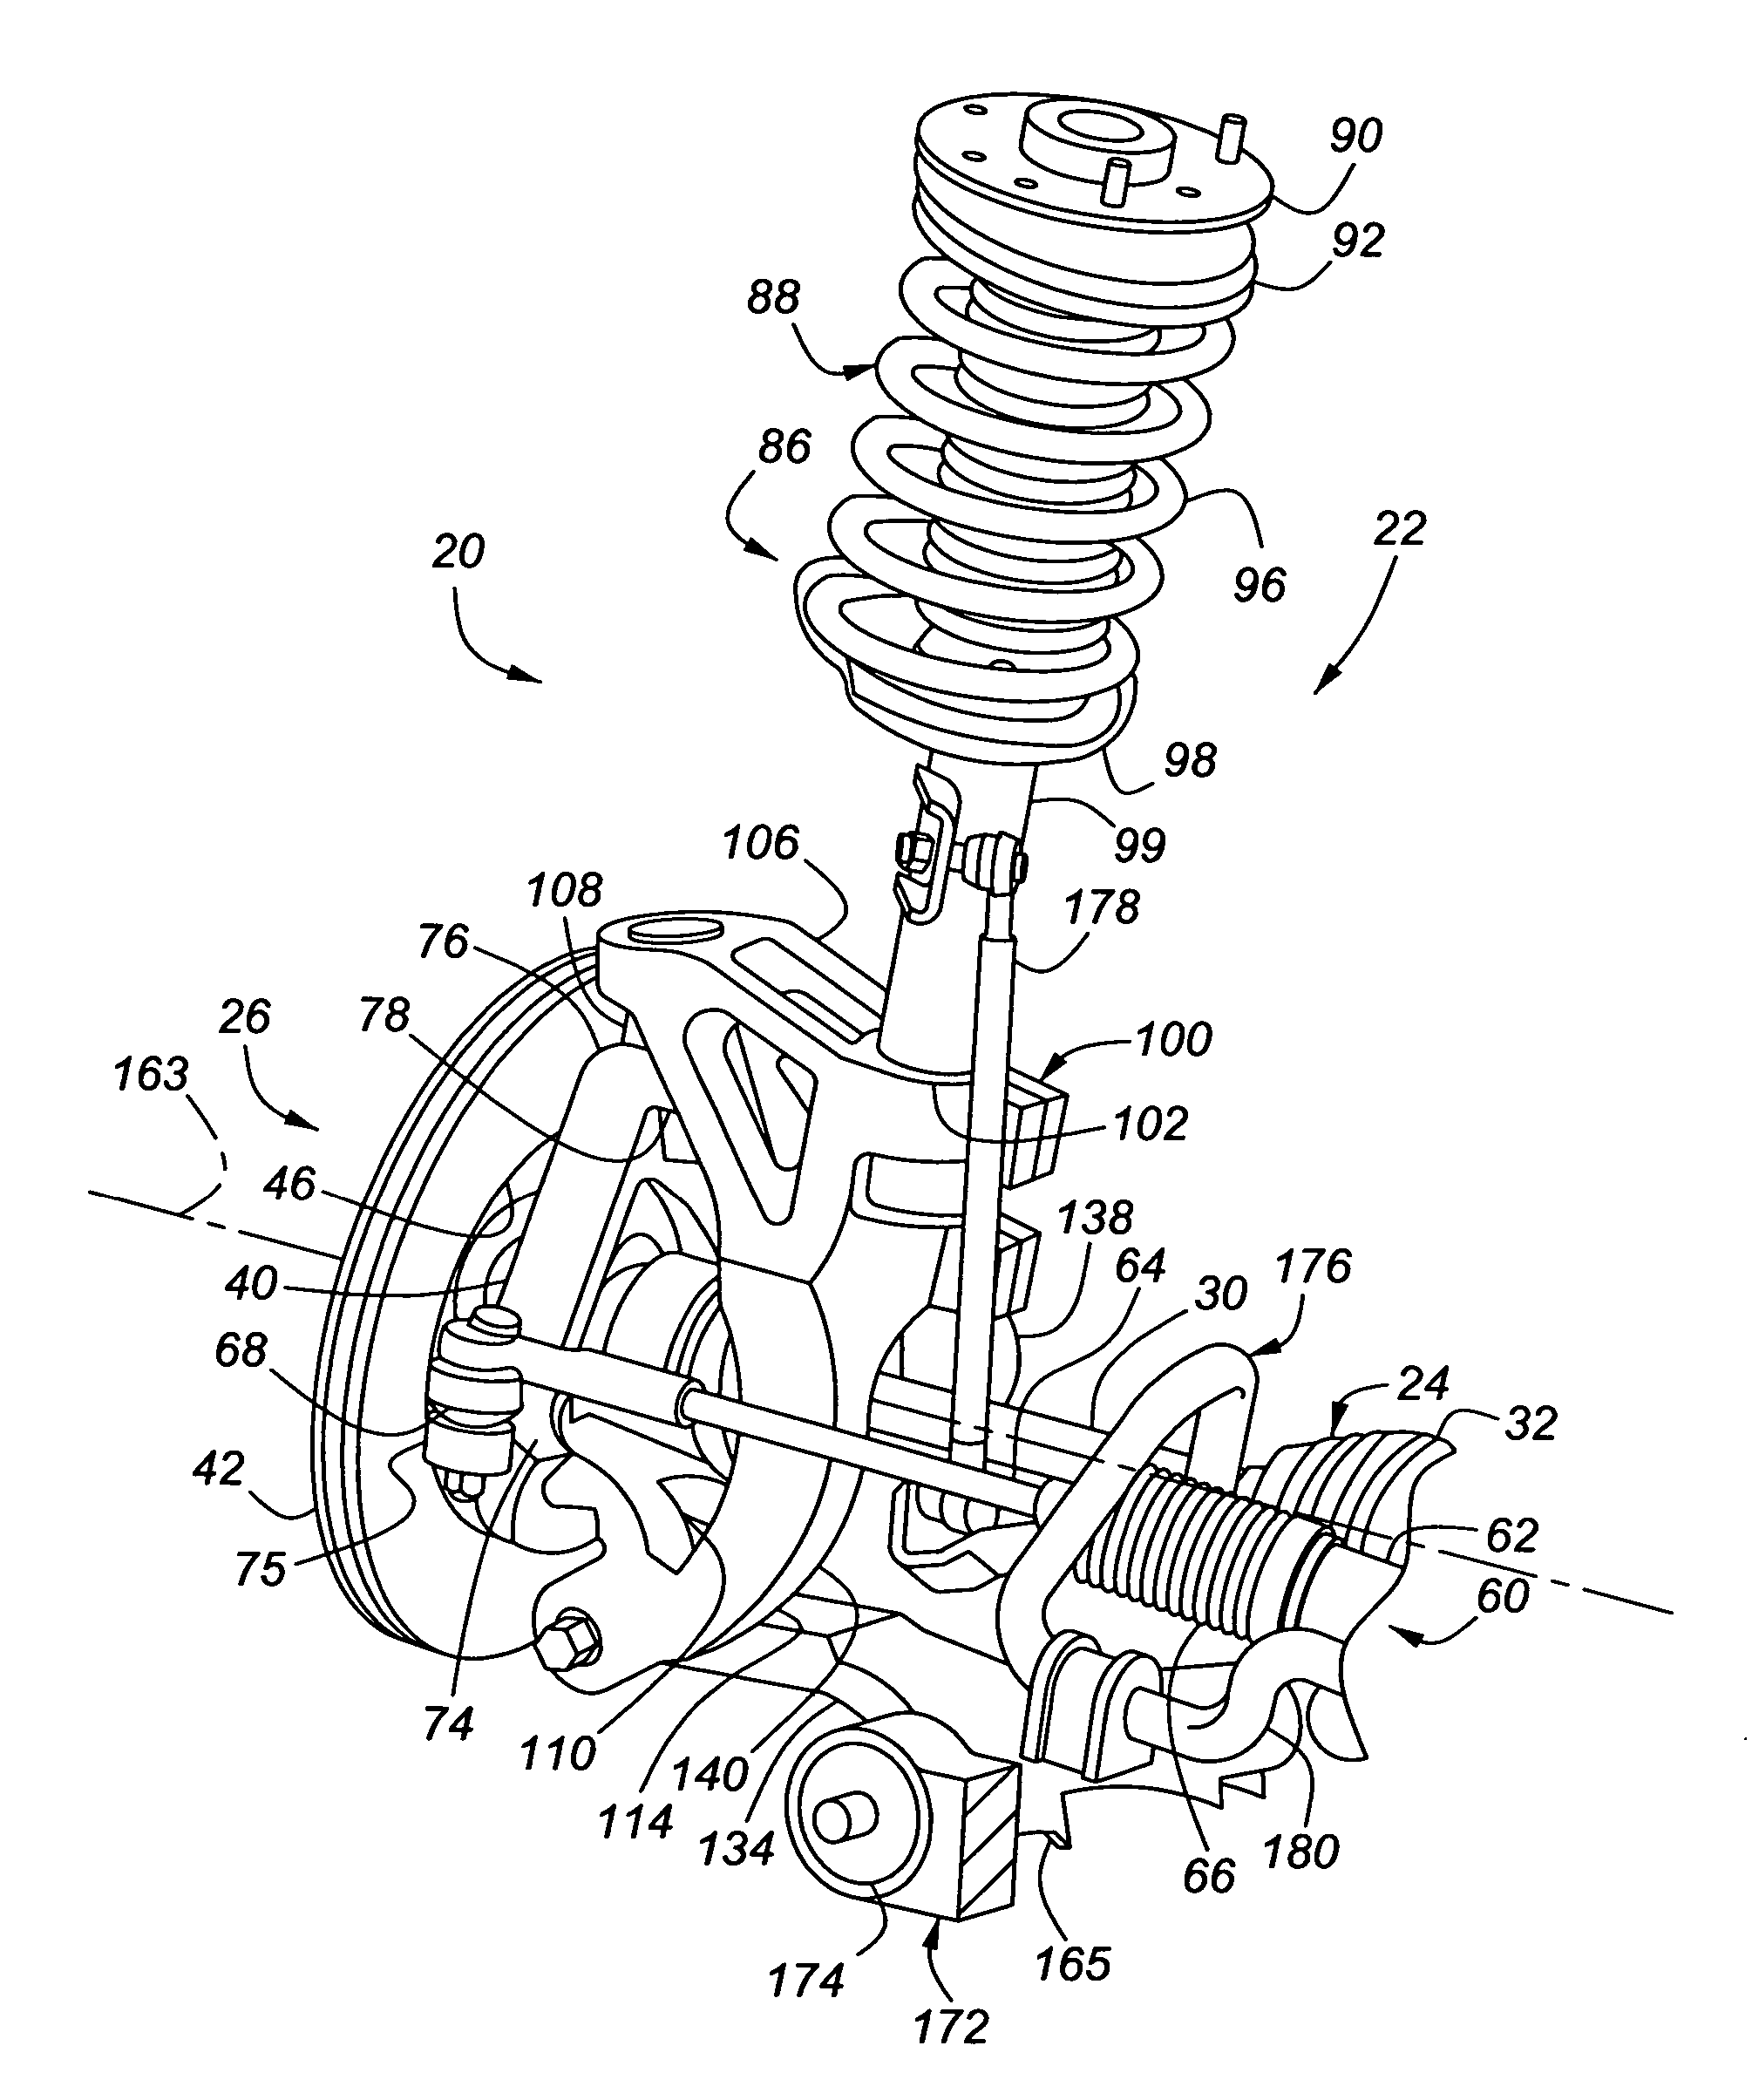 Steering and suspension system for a vehicle